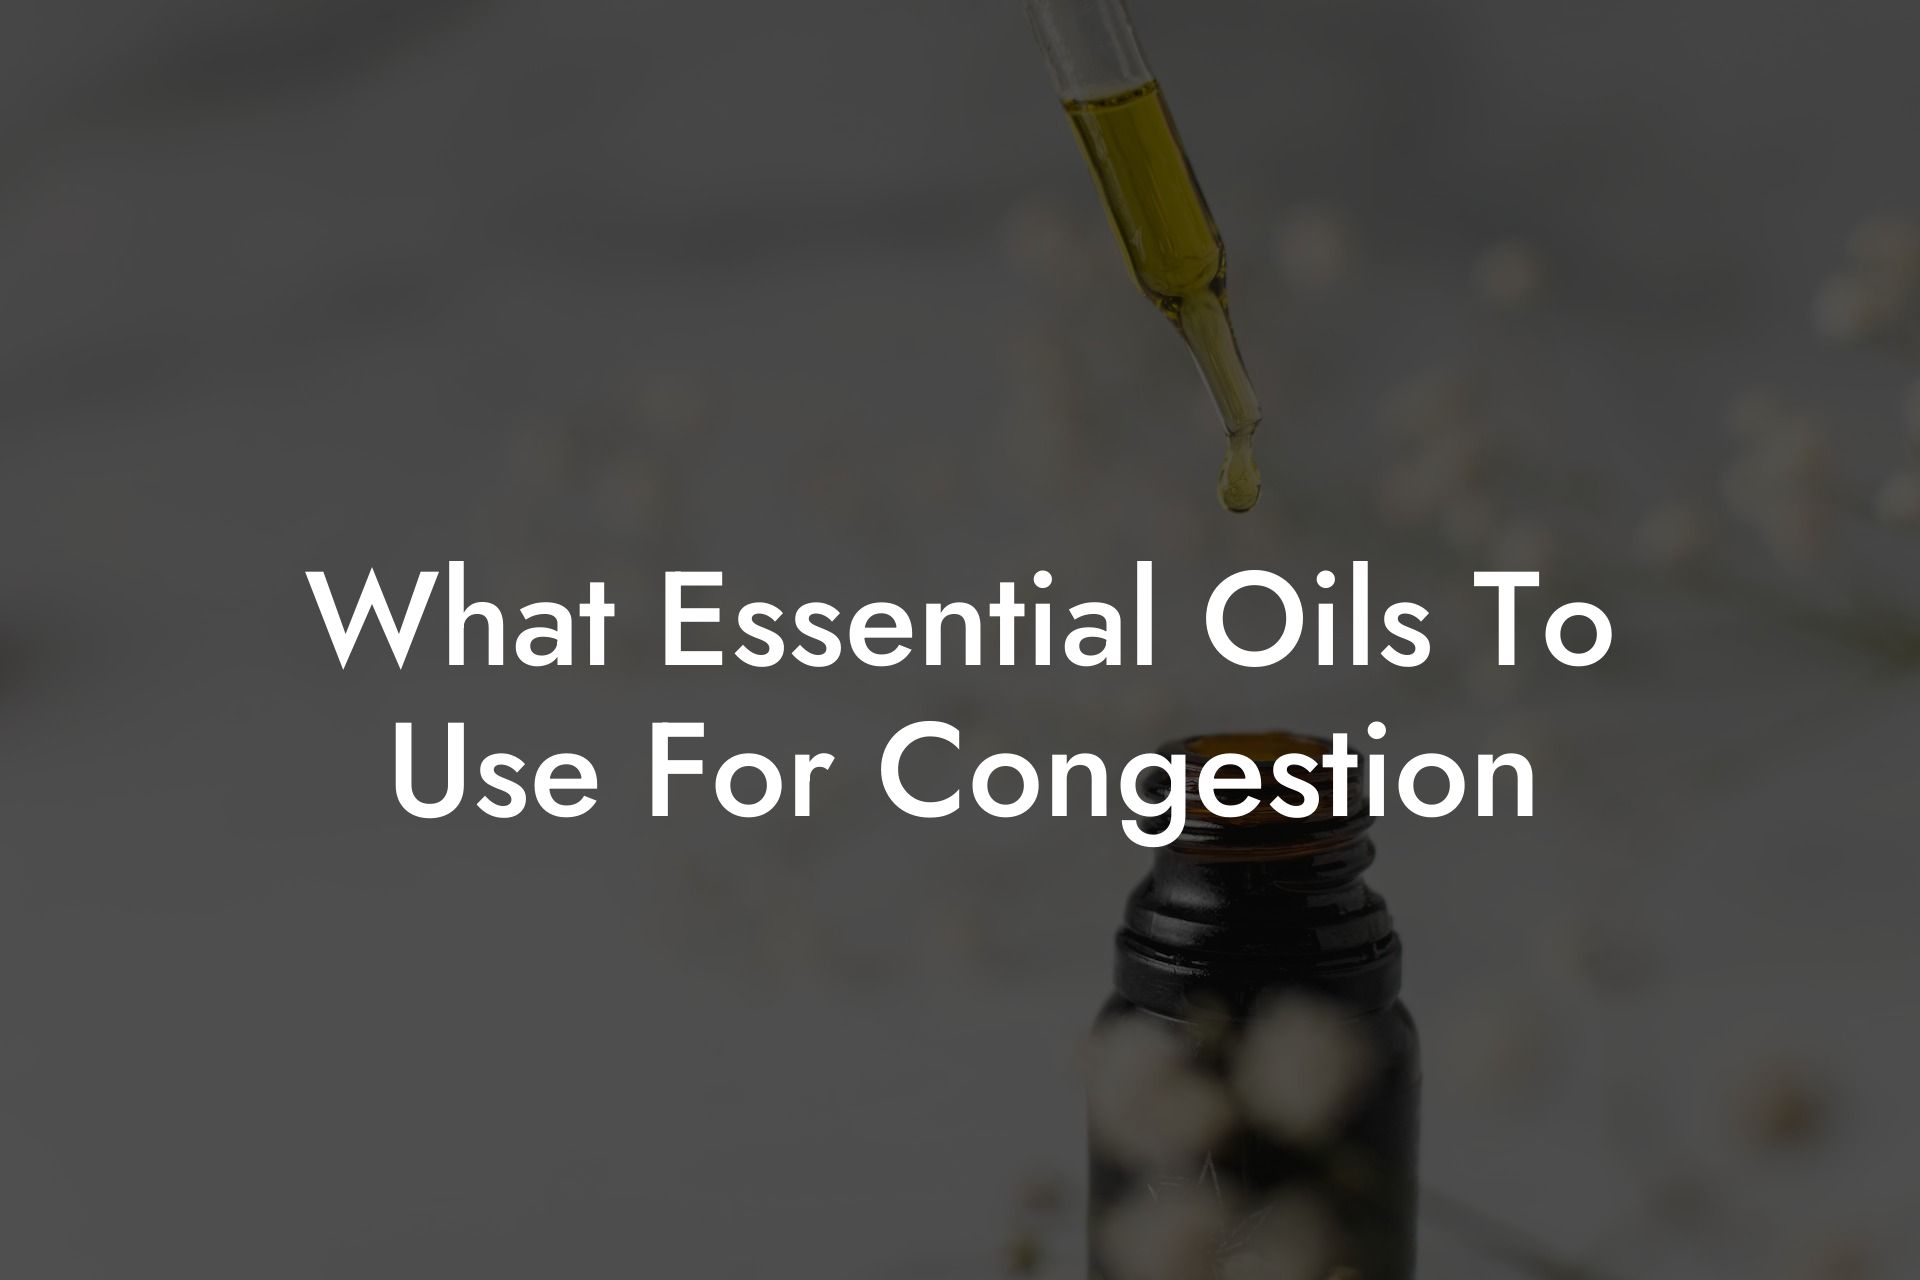 What Essential Oils To Use For Congestion